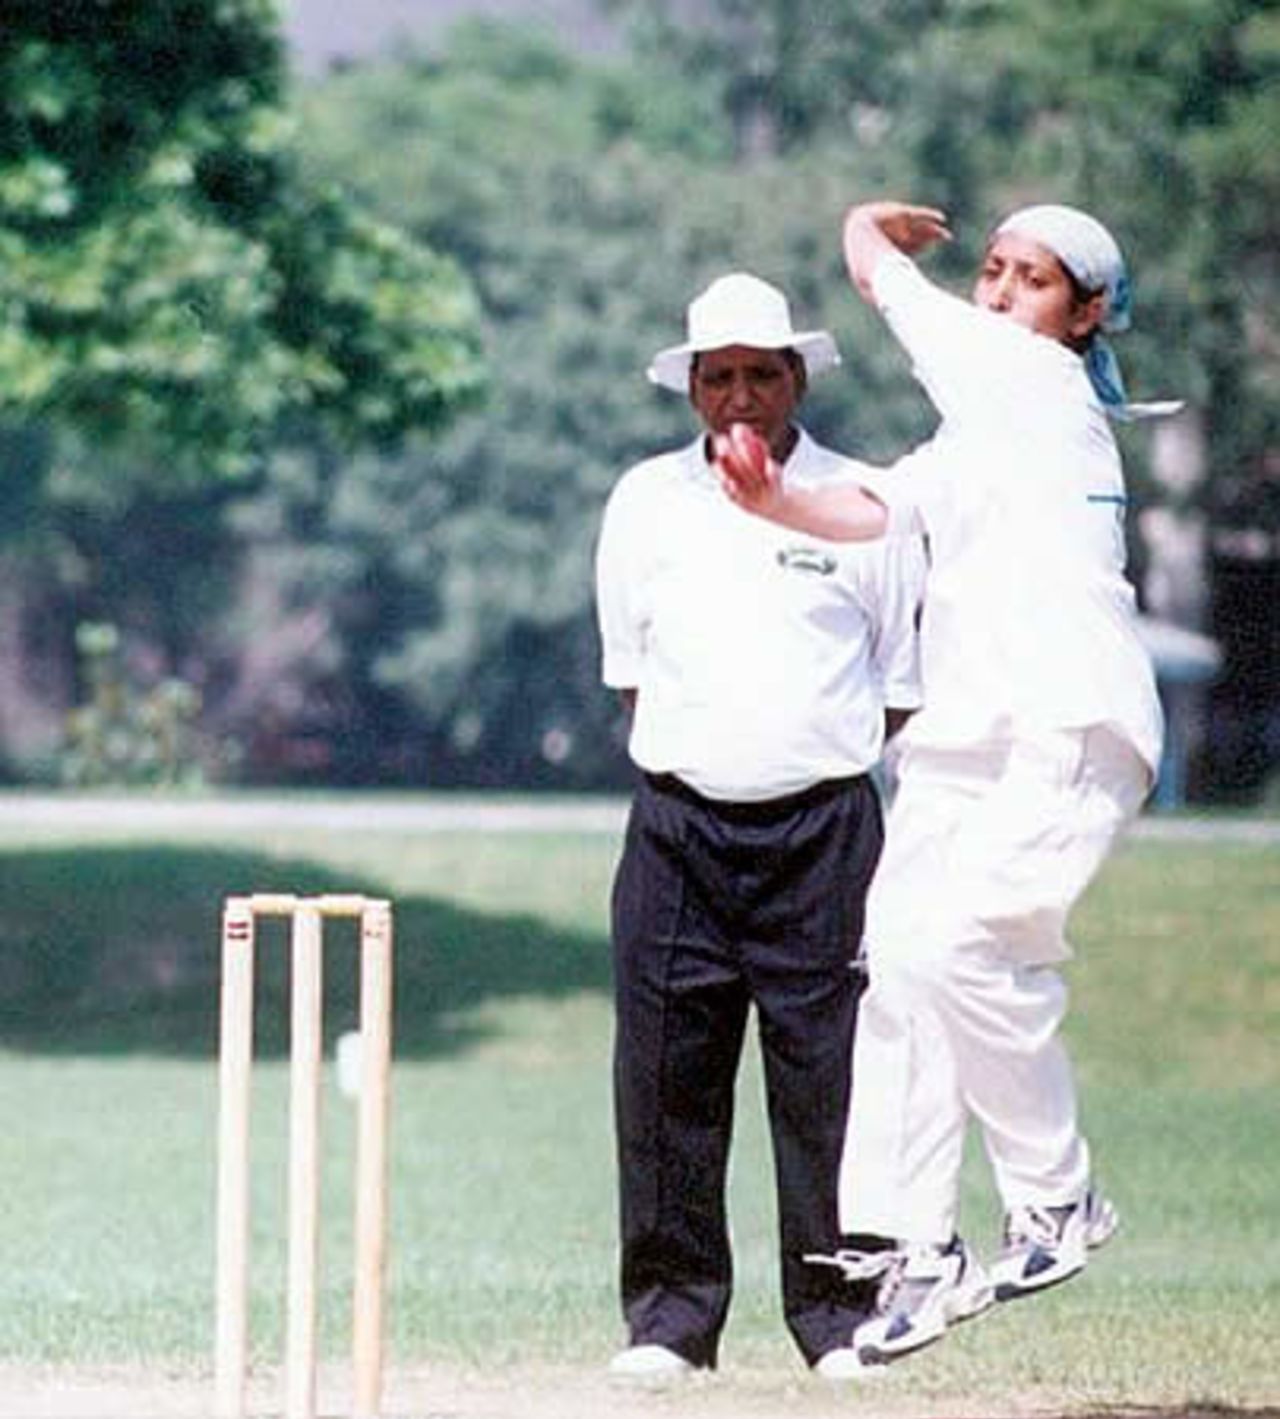 NWFP Women Team fast bowler in action aginst Sindh Women, National QEA Women Cricket Trophy 2002 at Race Course Park, 30 Sept to 5 Oct 2002